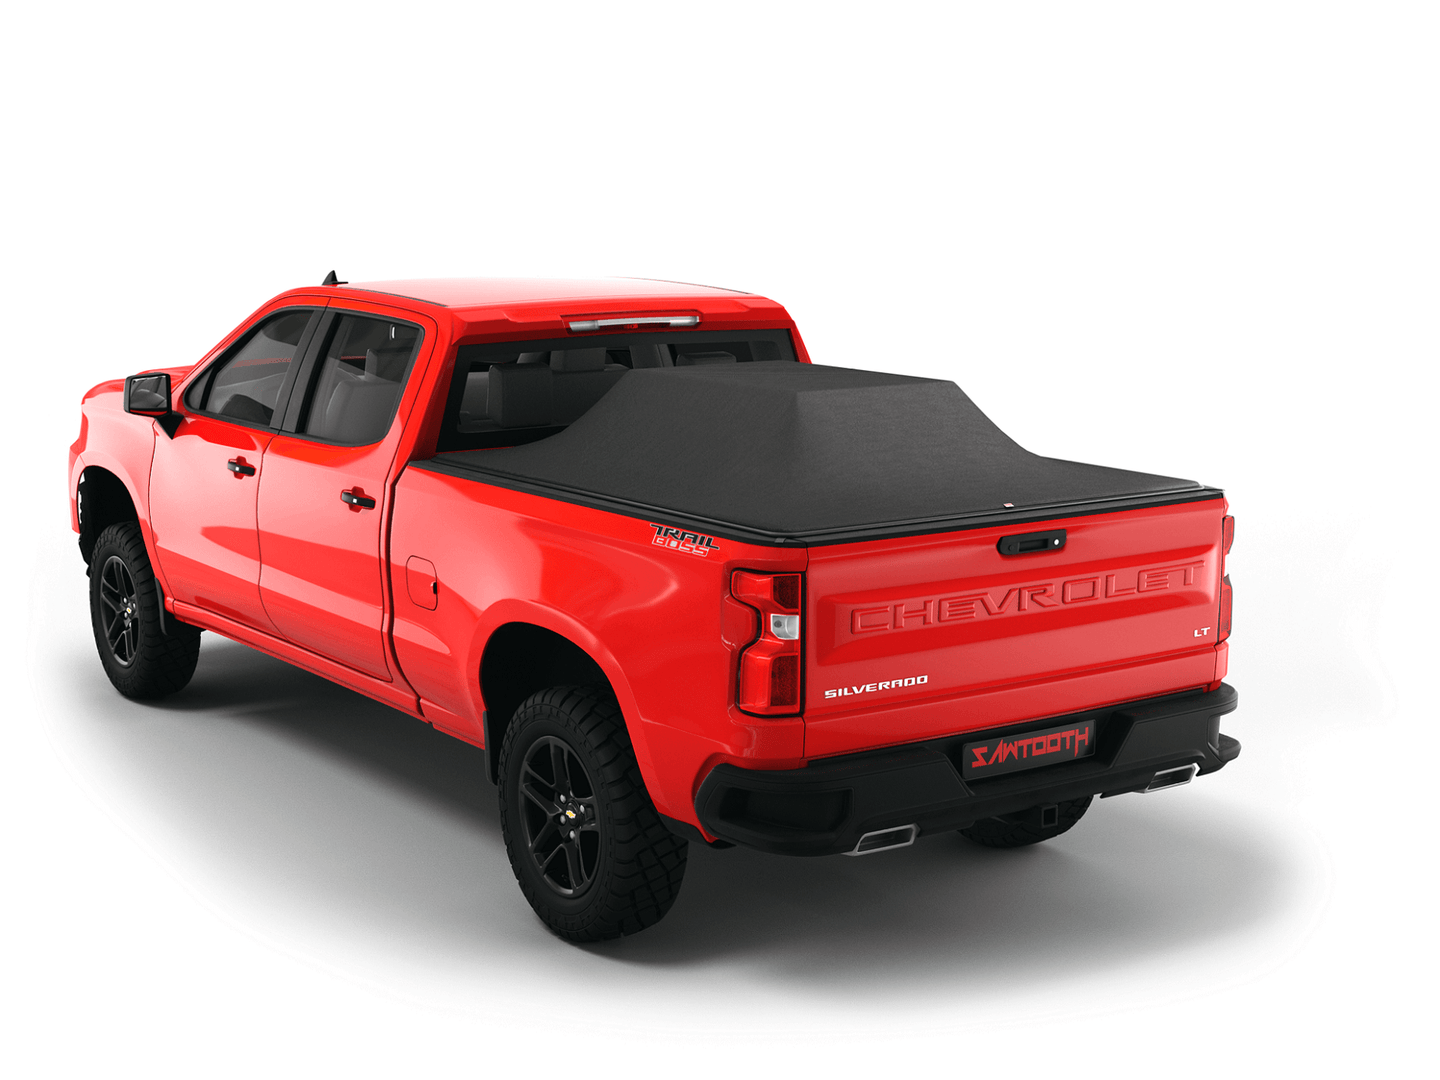 Red Chevrolet Silverado 2500HD / 3500 HD / GMC Sierra 2500HD / 3500HD with gear in the truck bed and the Sawtooth Stretch tonneau cover expanded over cargo load